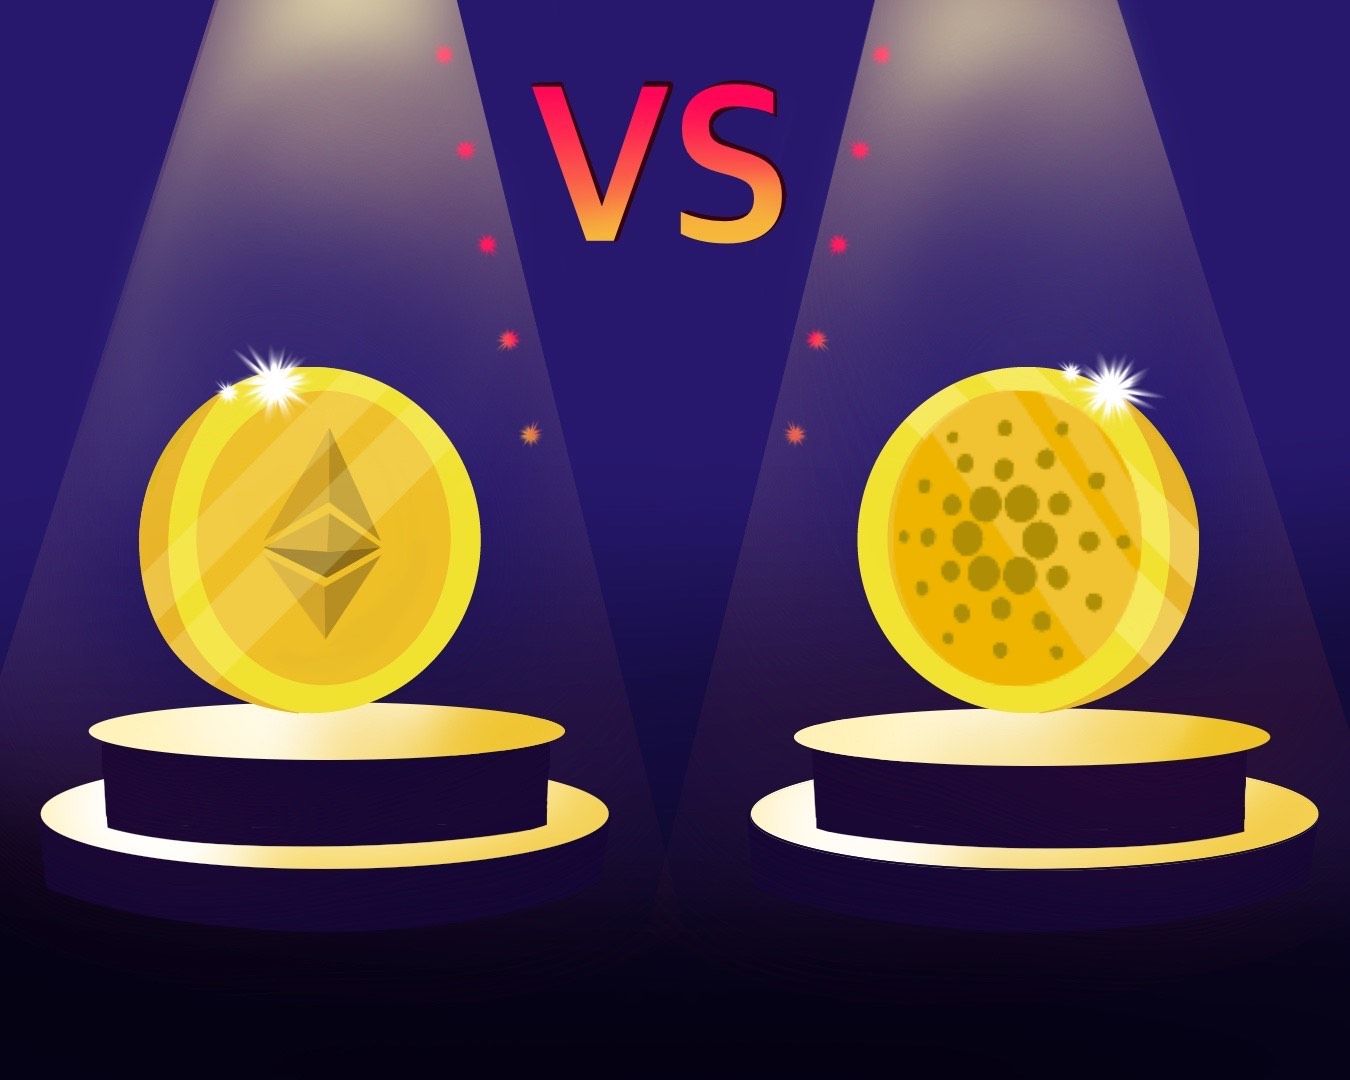 Cardano vs Ethereum: How Are They Different?